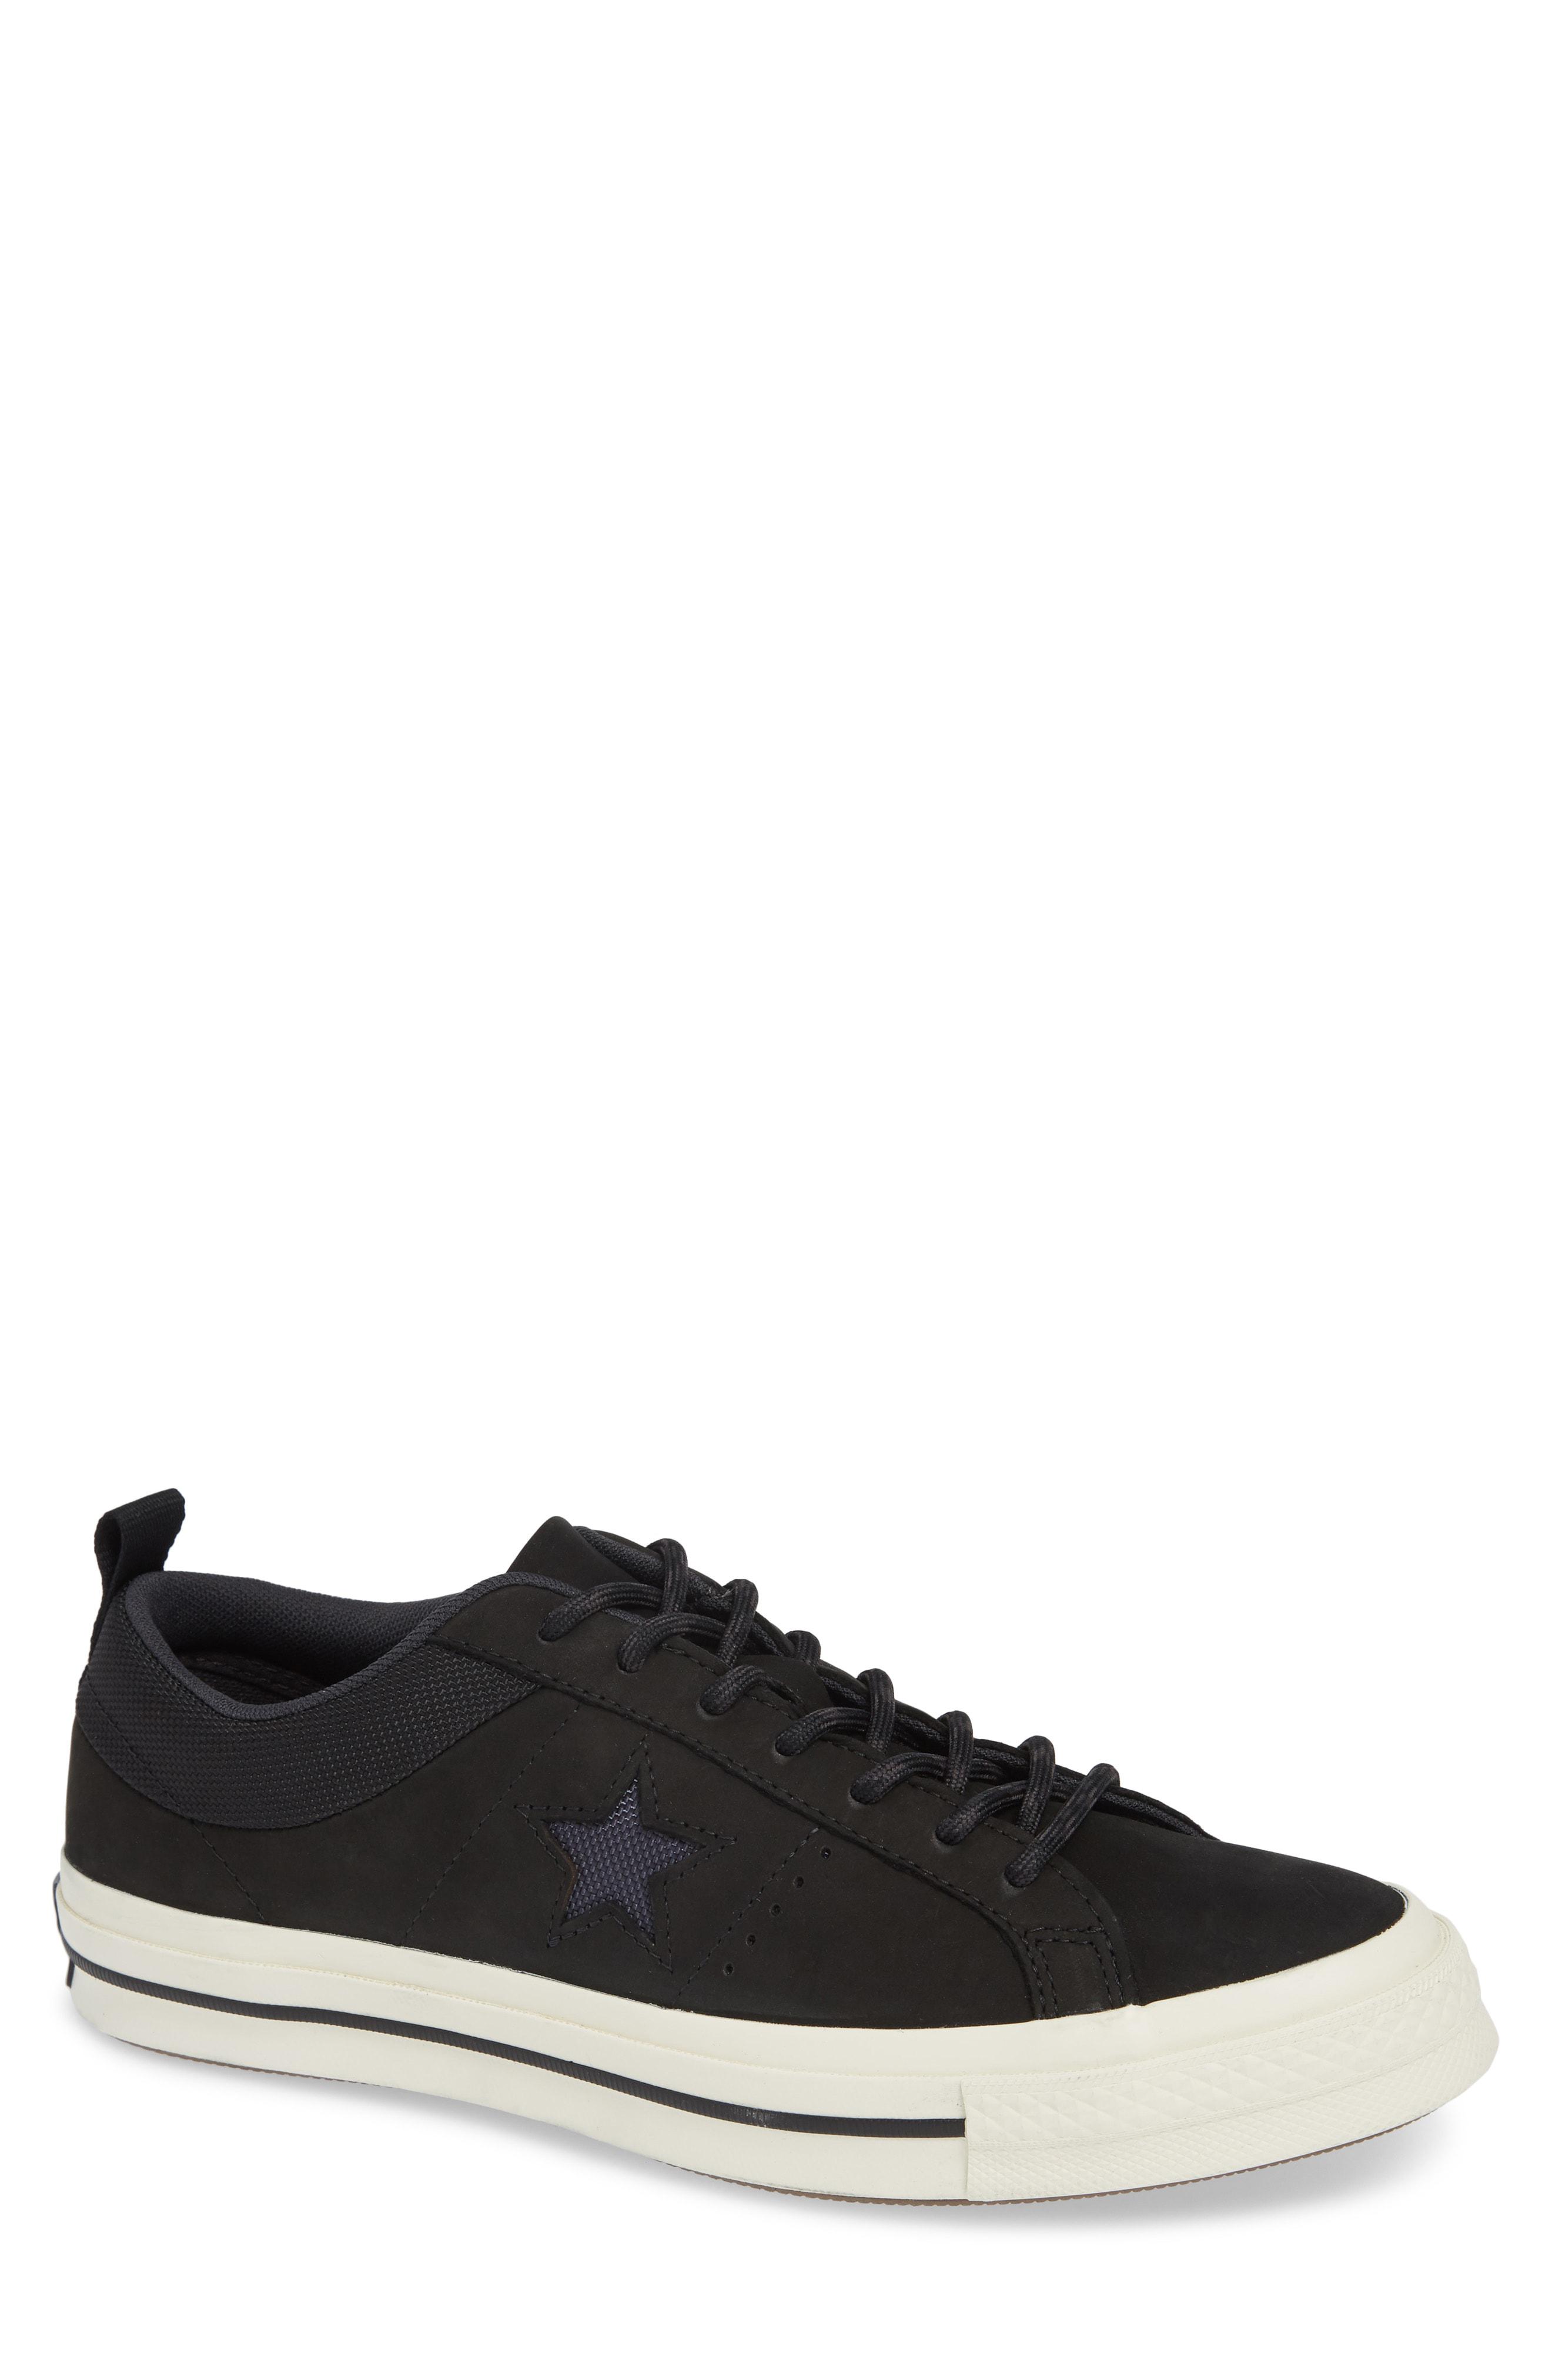 converse one star sierra leather